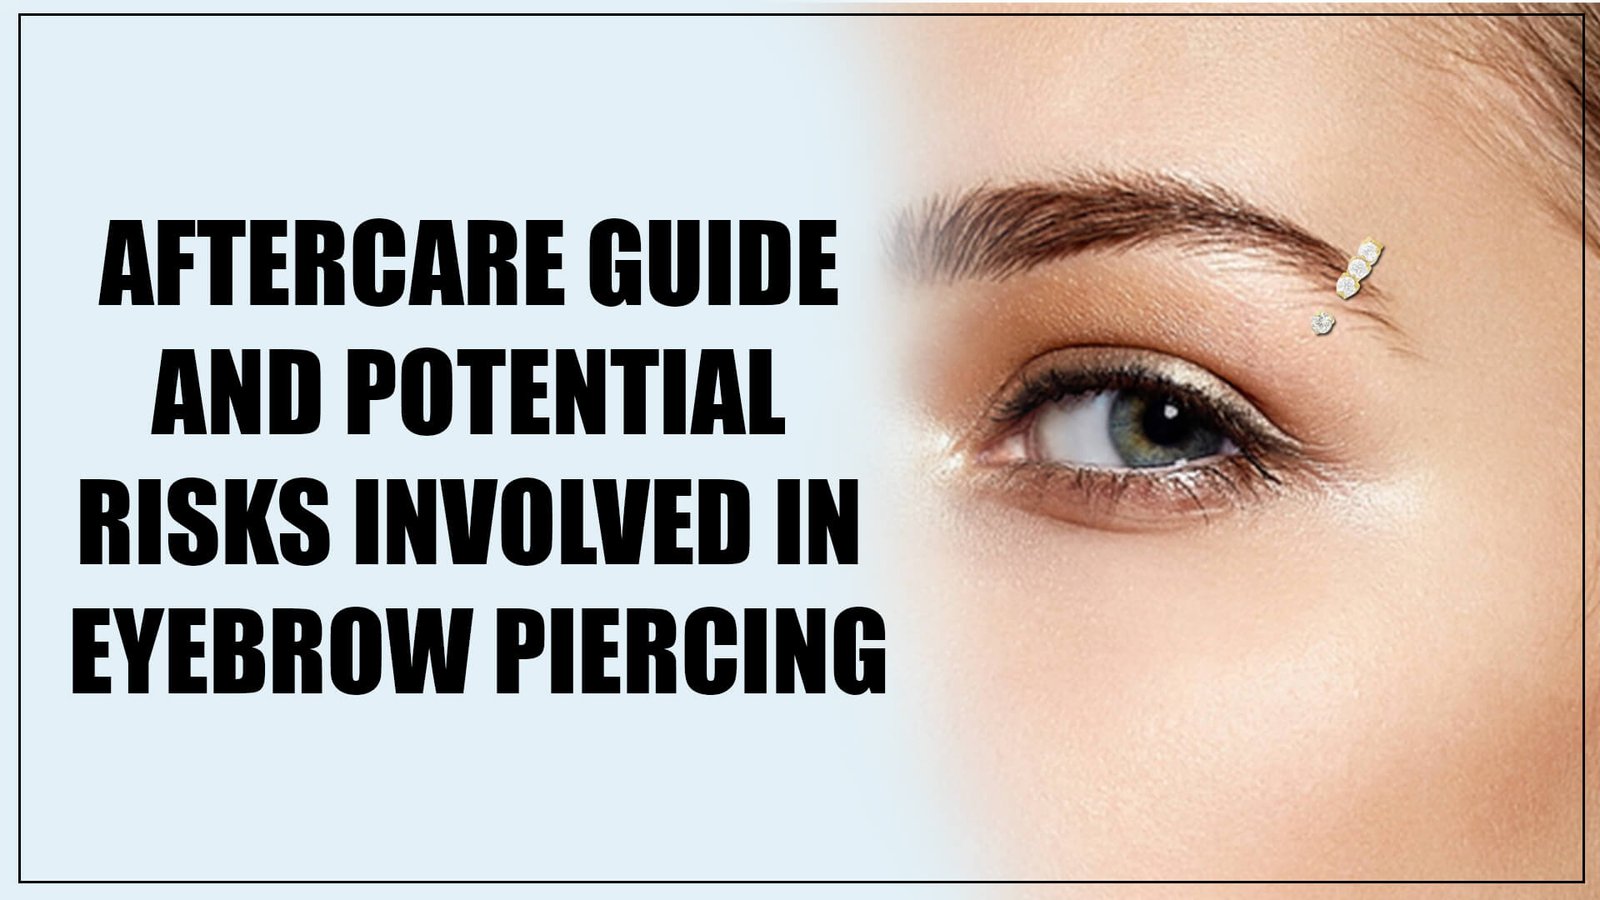 Aftercare Guide and Potential Risks Involved in Eyebrow Piercing